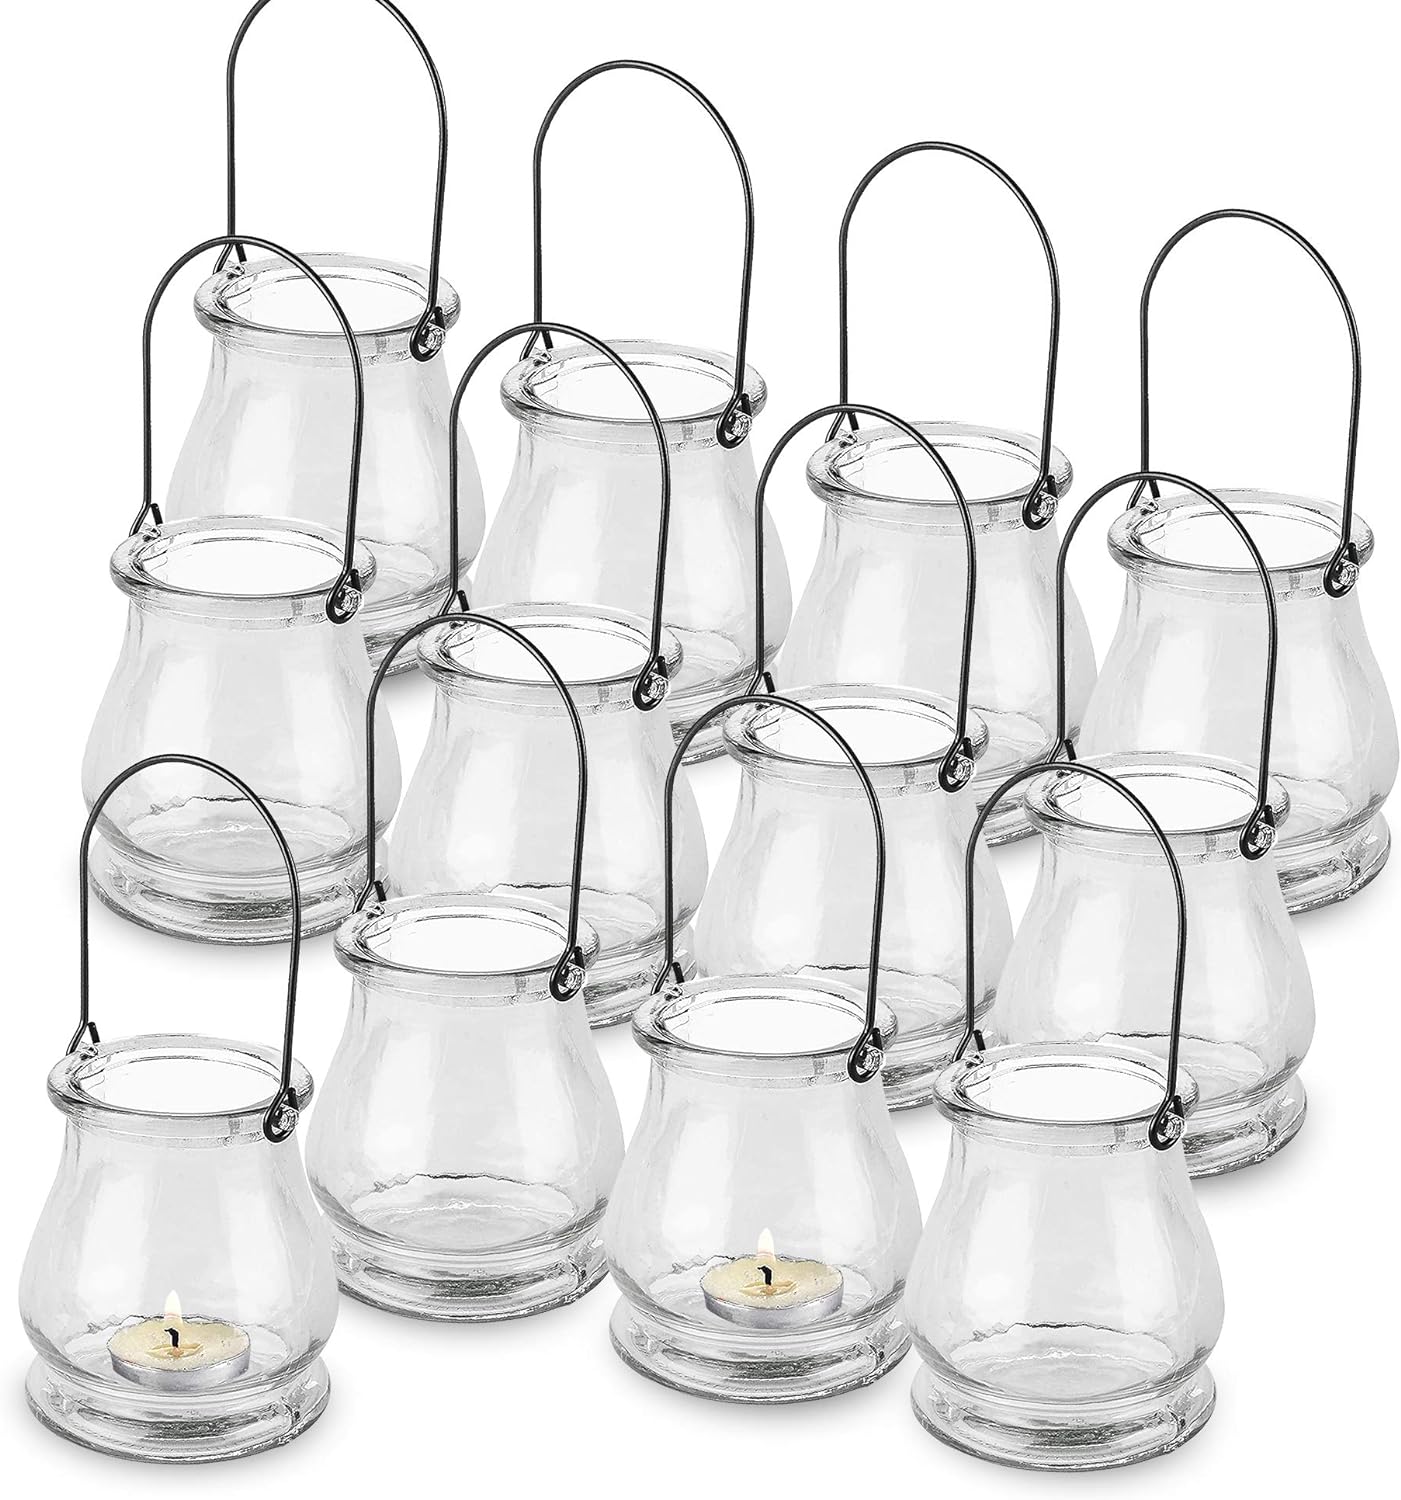 Glass Hanging Candle Holders - Set of 12